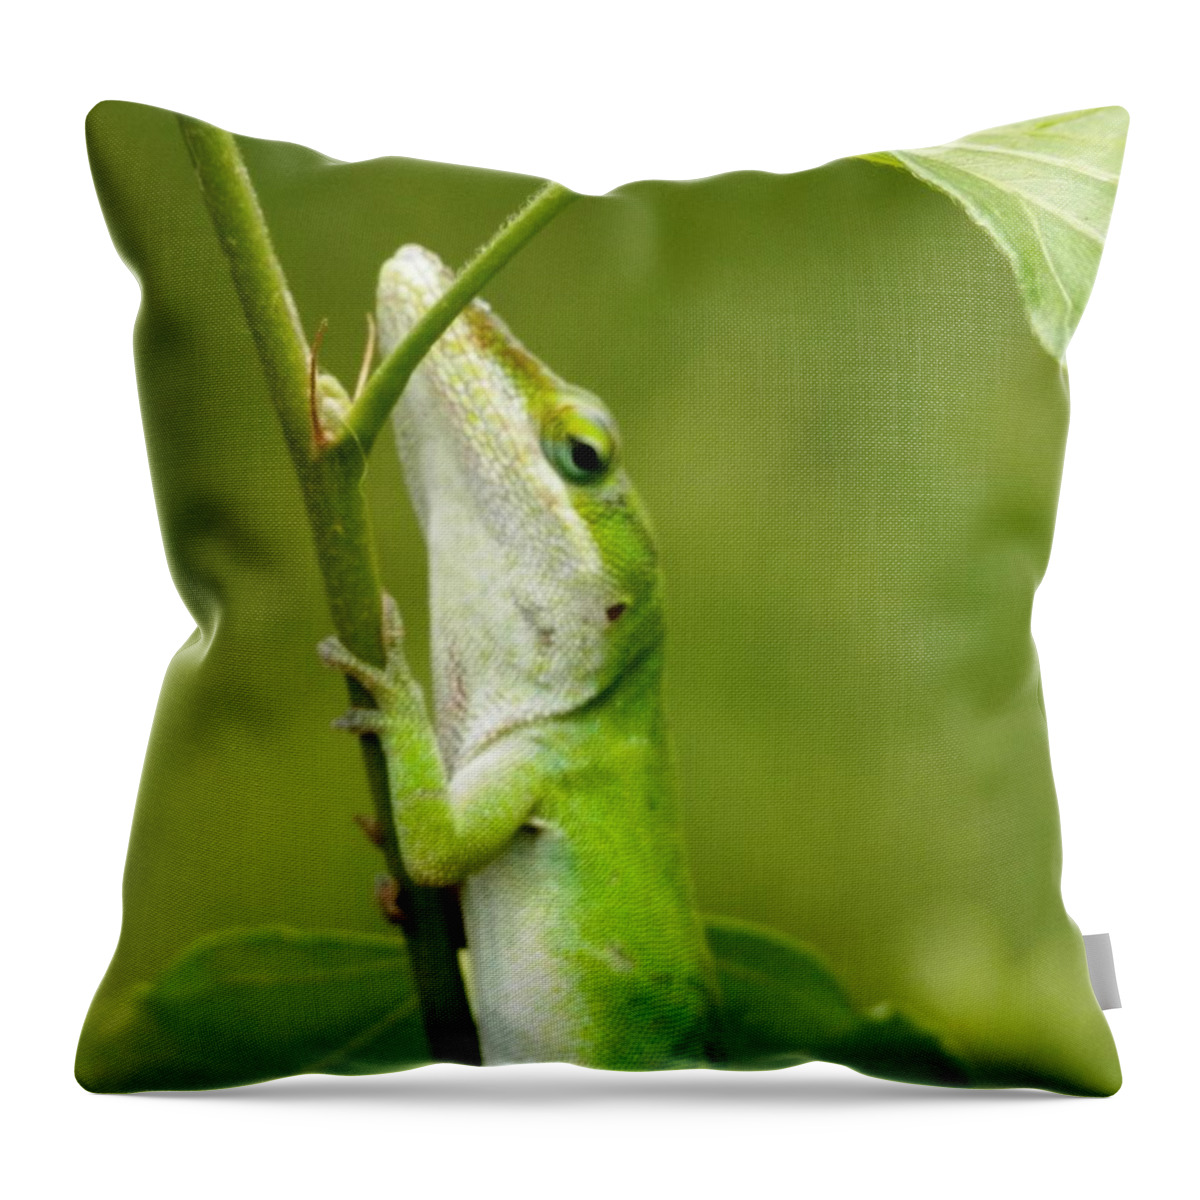  #green #lizard #slim #stem #shaded. #hot #florida #summer Throw Pillow featuring the photograph Green Lizard on Hold by Belinda Lee